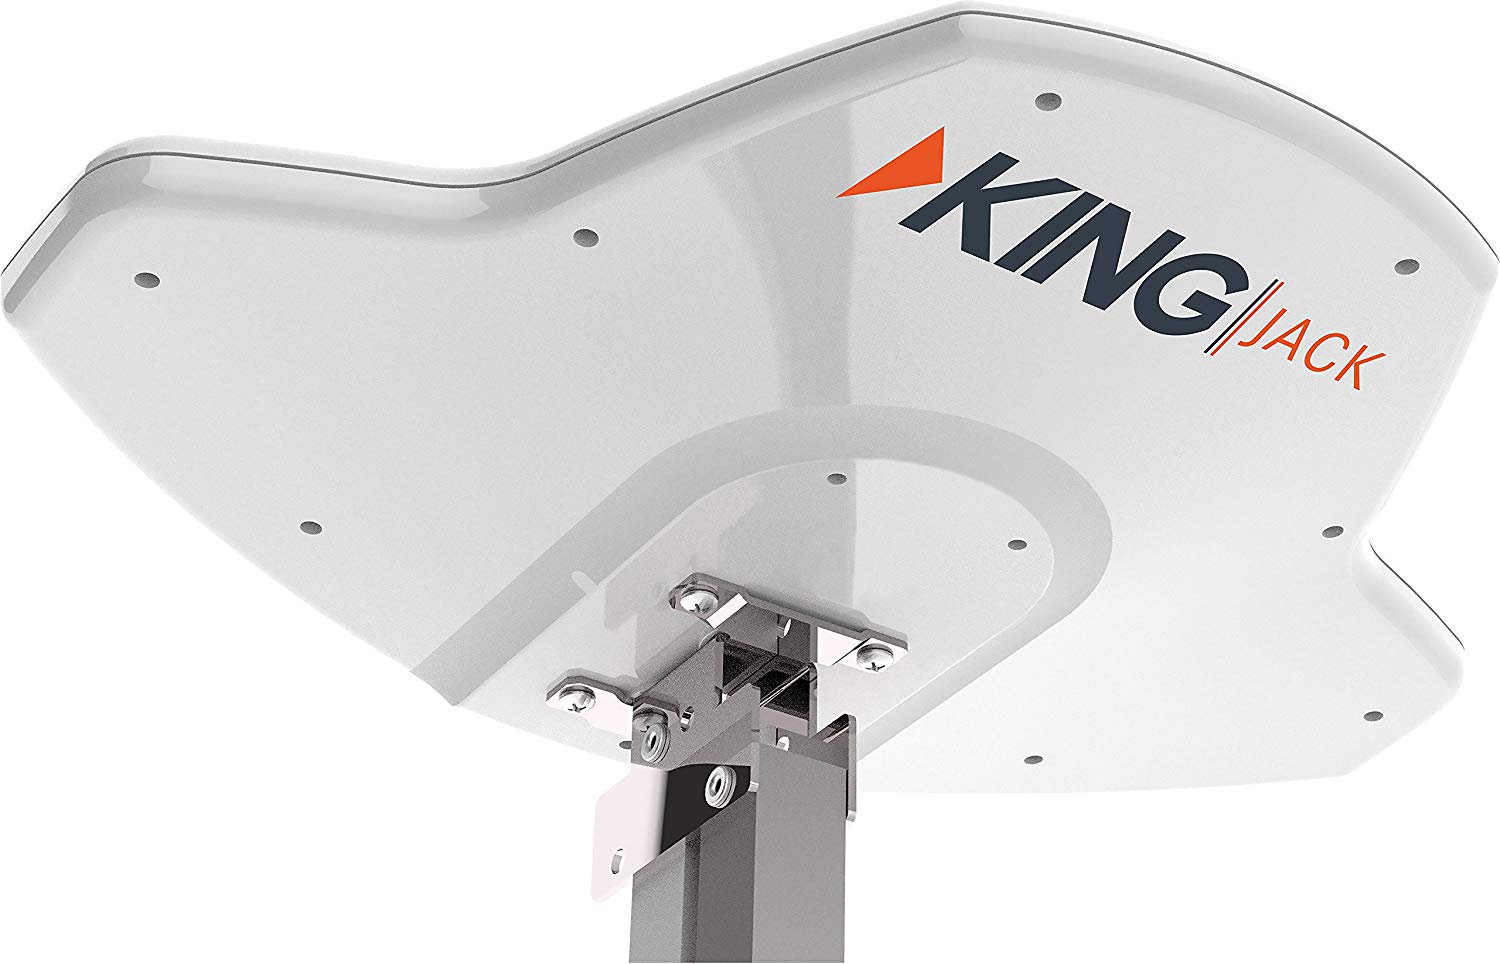 Picture of King K6B-OA8300 HDTV Batwing Antenna Replacement without Signal Meter